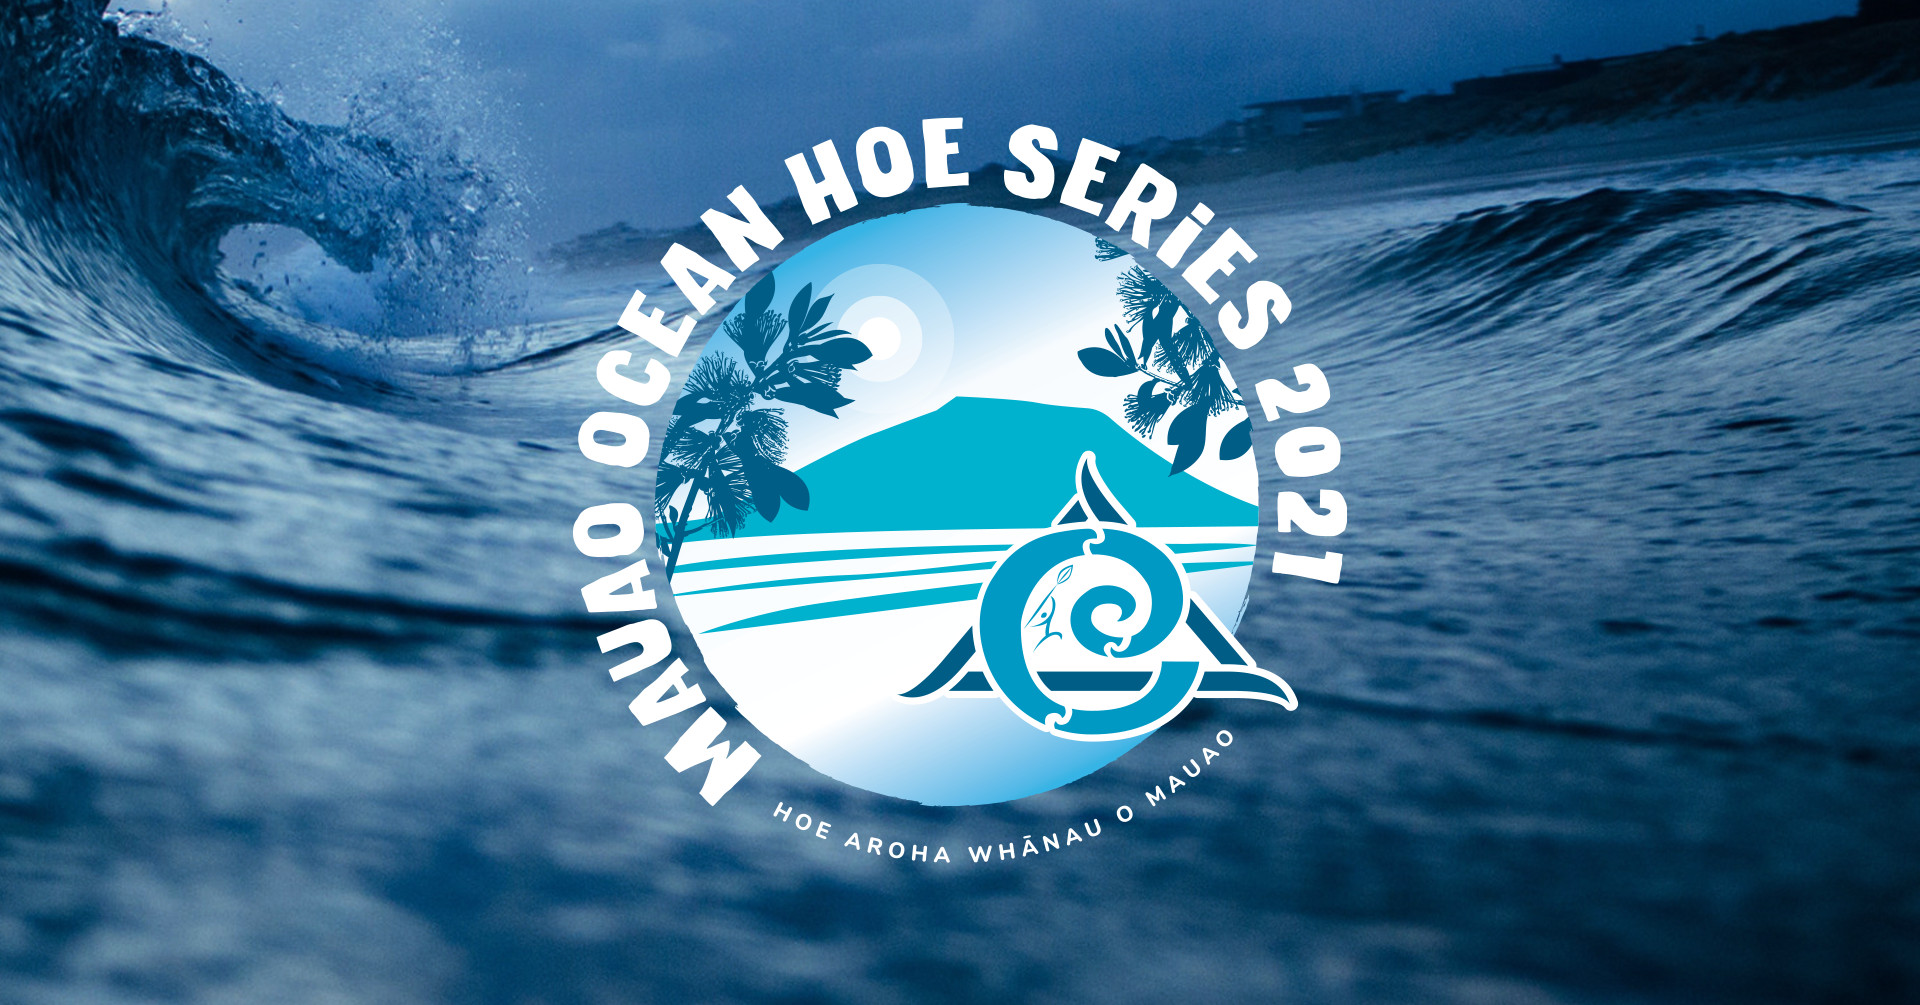 Results & Wrap Up: Mauao Ocean Hoe Series Race 1